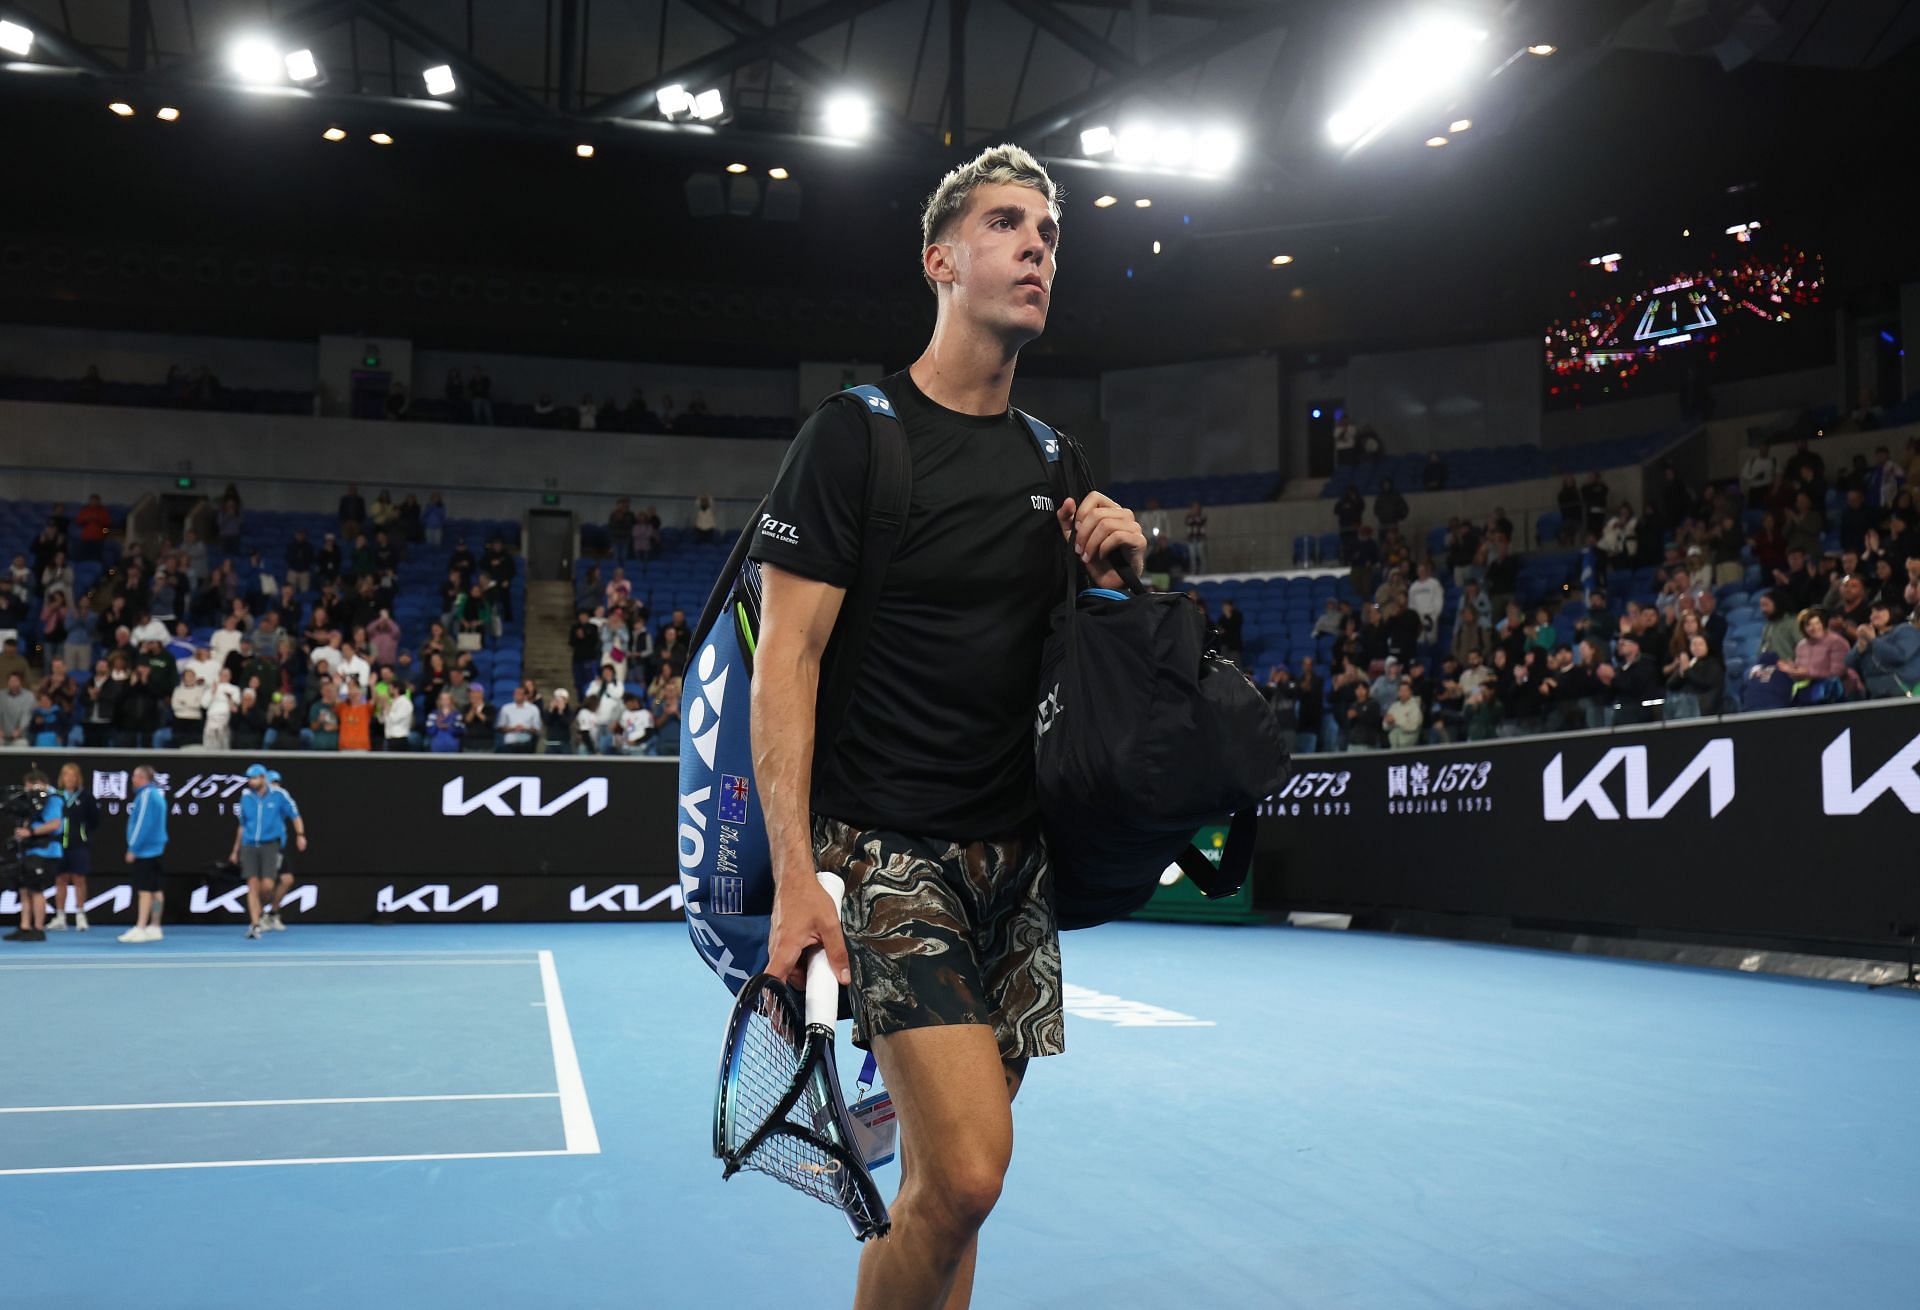 Total wipeout: 'Netflix curse' strikes tennis players at Australian Open, Television